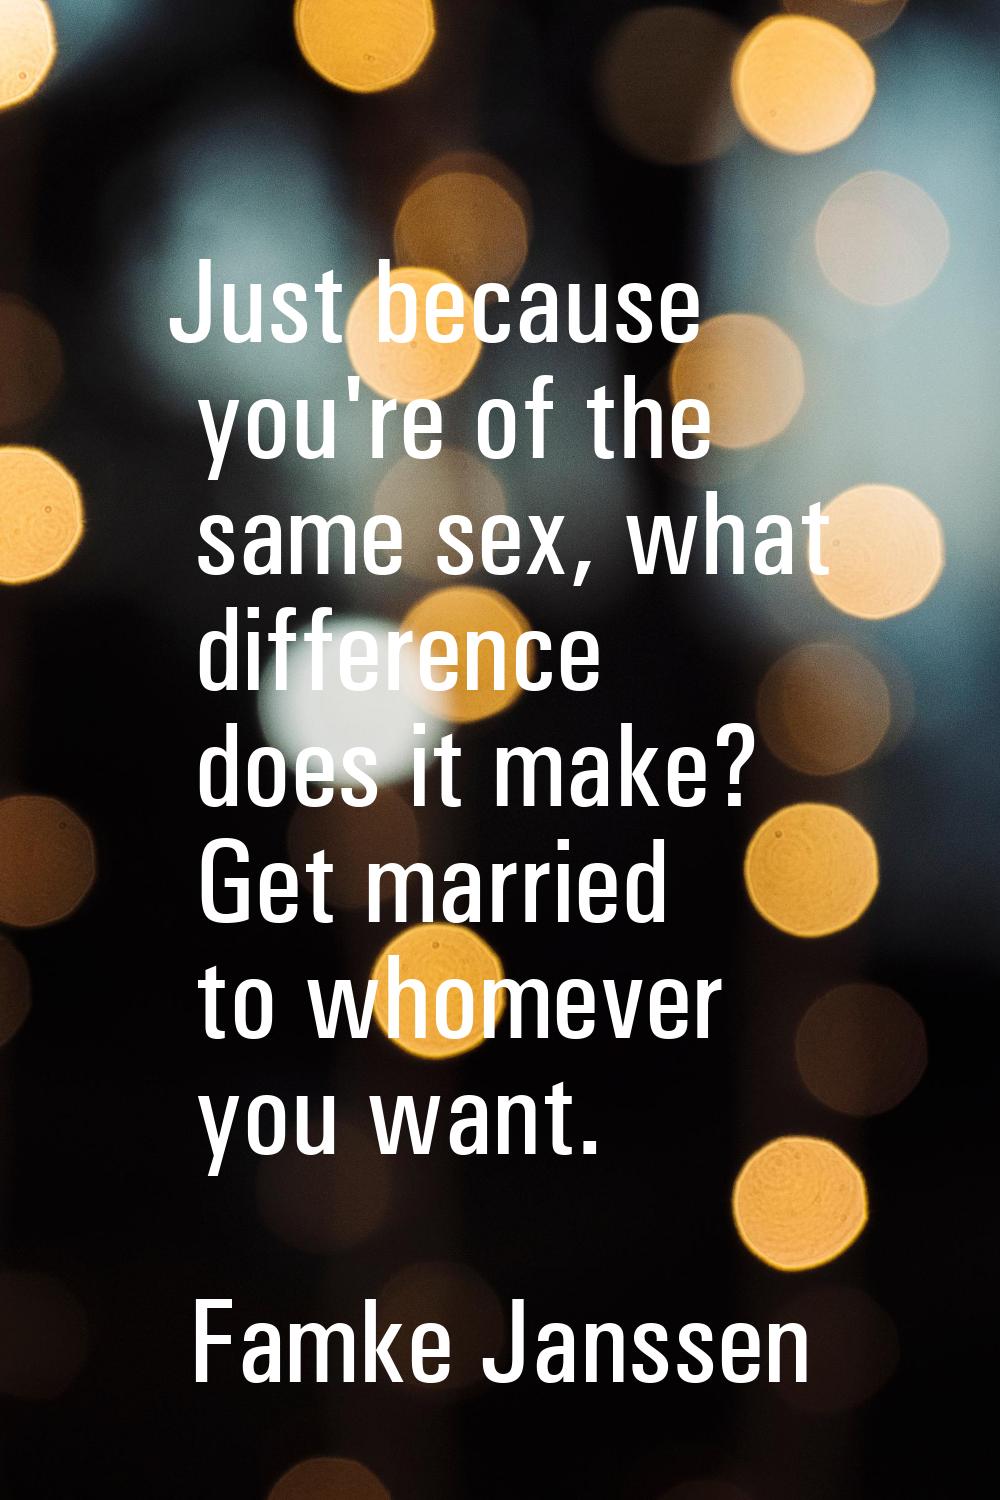 Just because you're of the same sex, what difference does it make? Get married to whomever you want